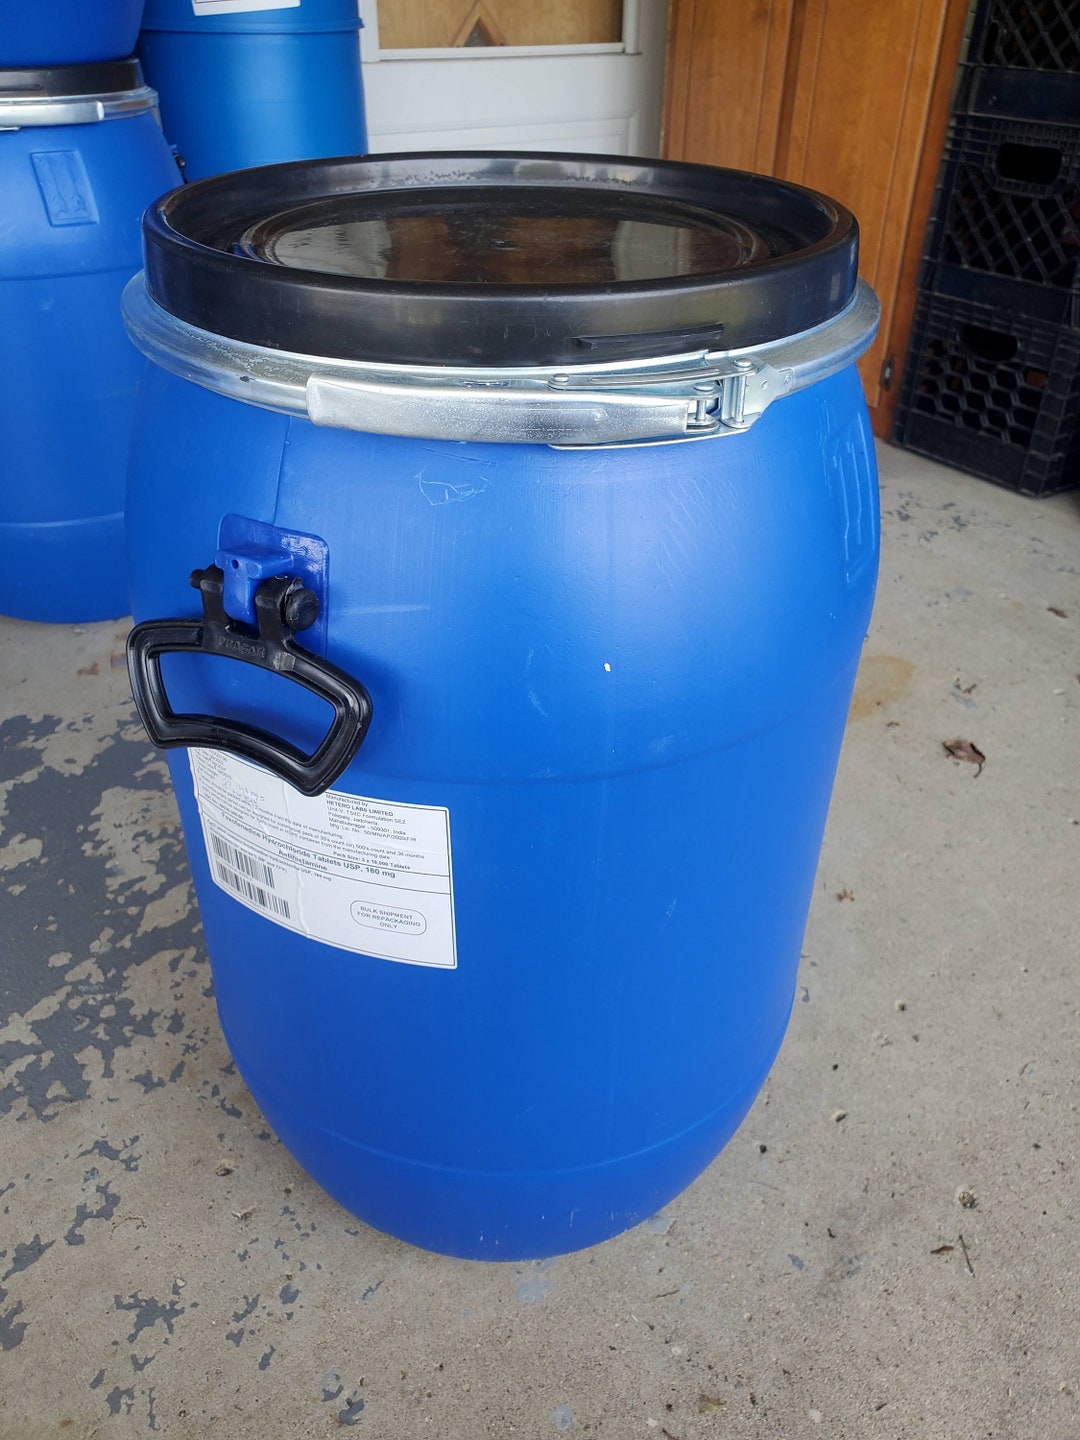 15 Gallon Food Grade Barrel With Handles, Locking Ring, and Lid. 